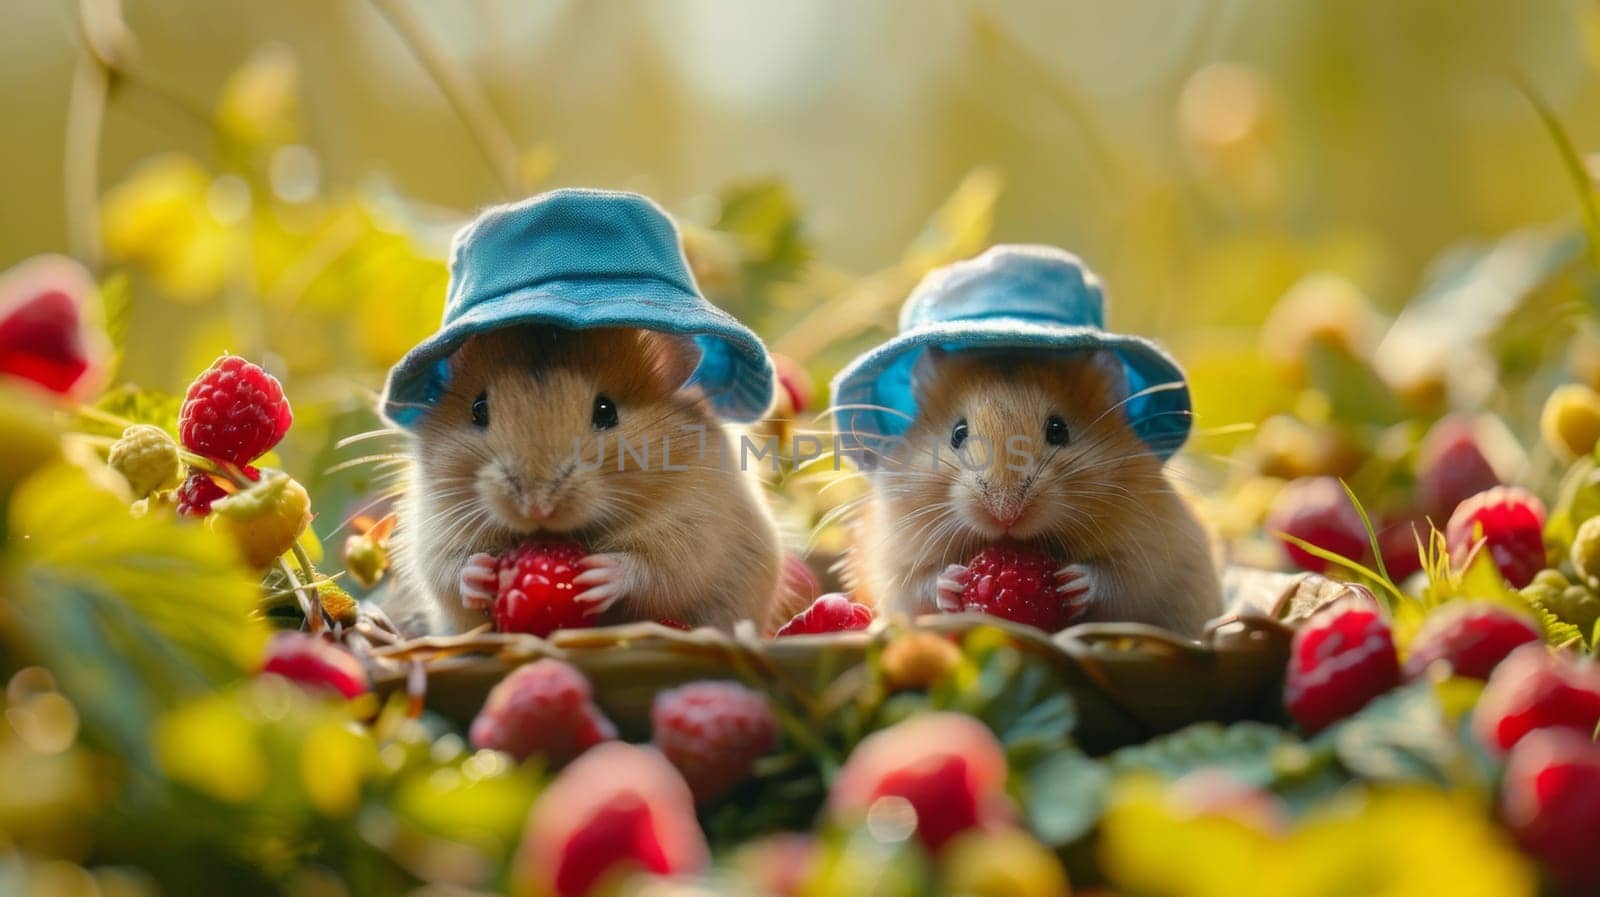 Two small rodents wearing hats are eating berries in a field, AI by starush